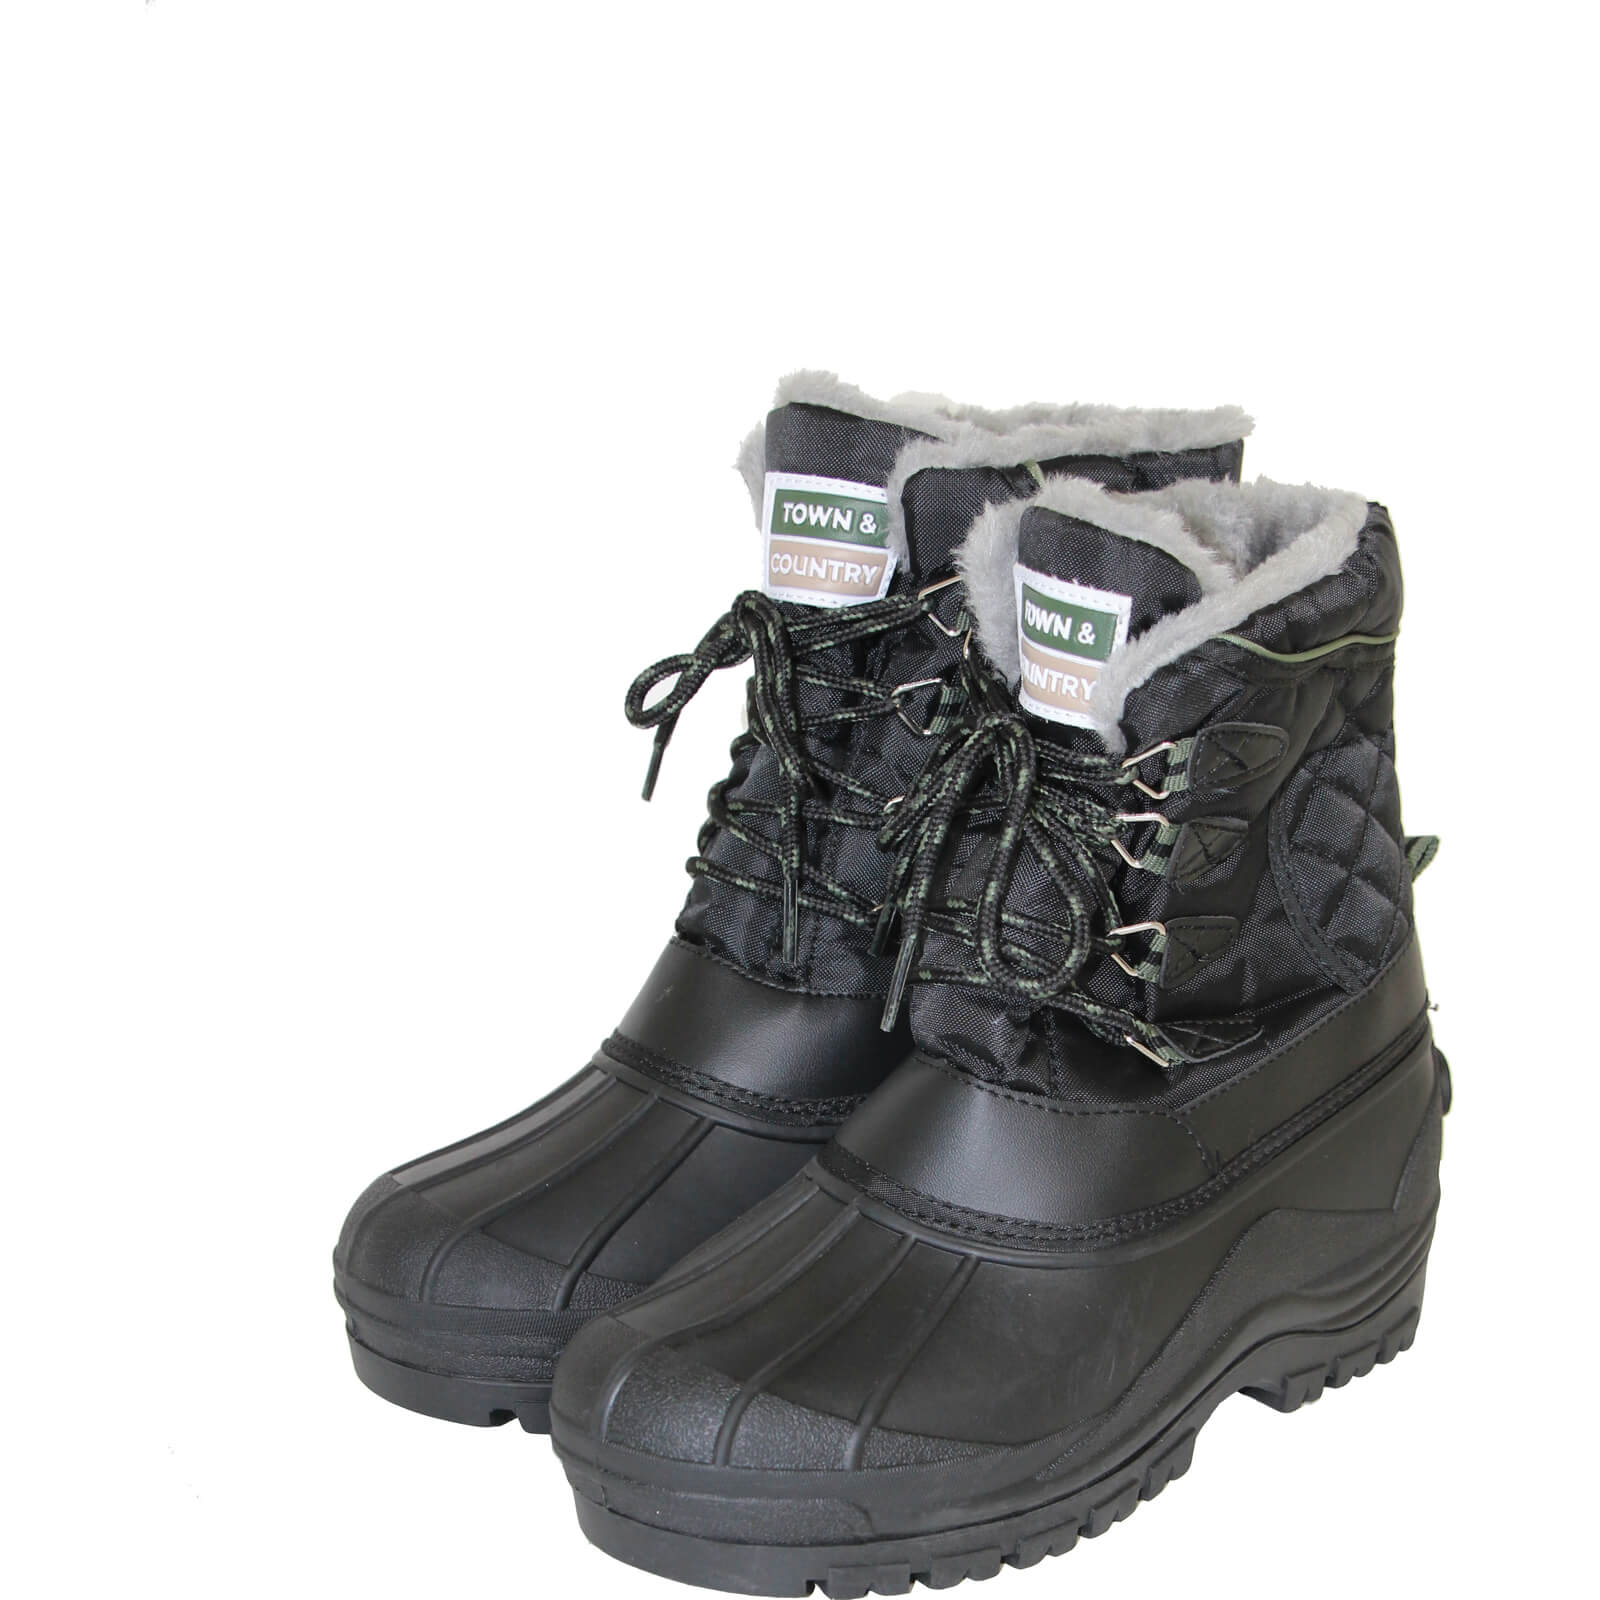 Image of Town and Country Curbridge Waterproof Lined Winter Boots Black Size 7